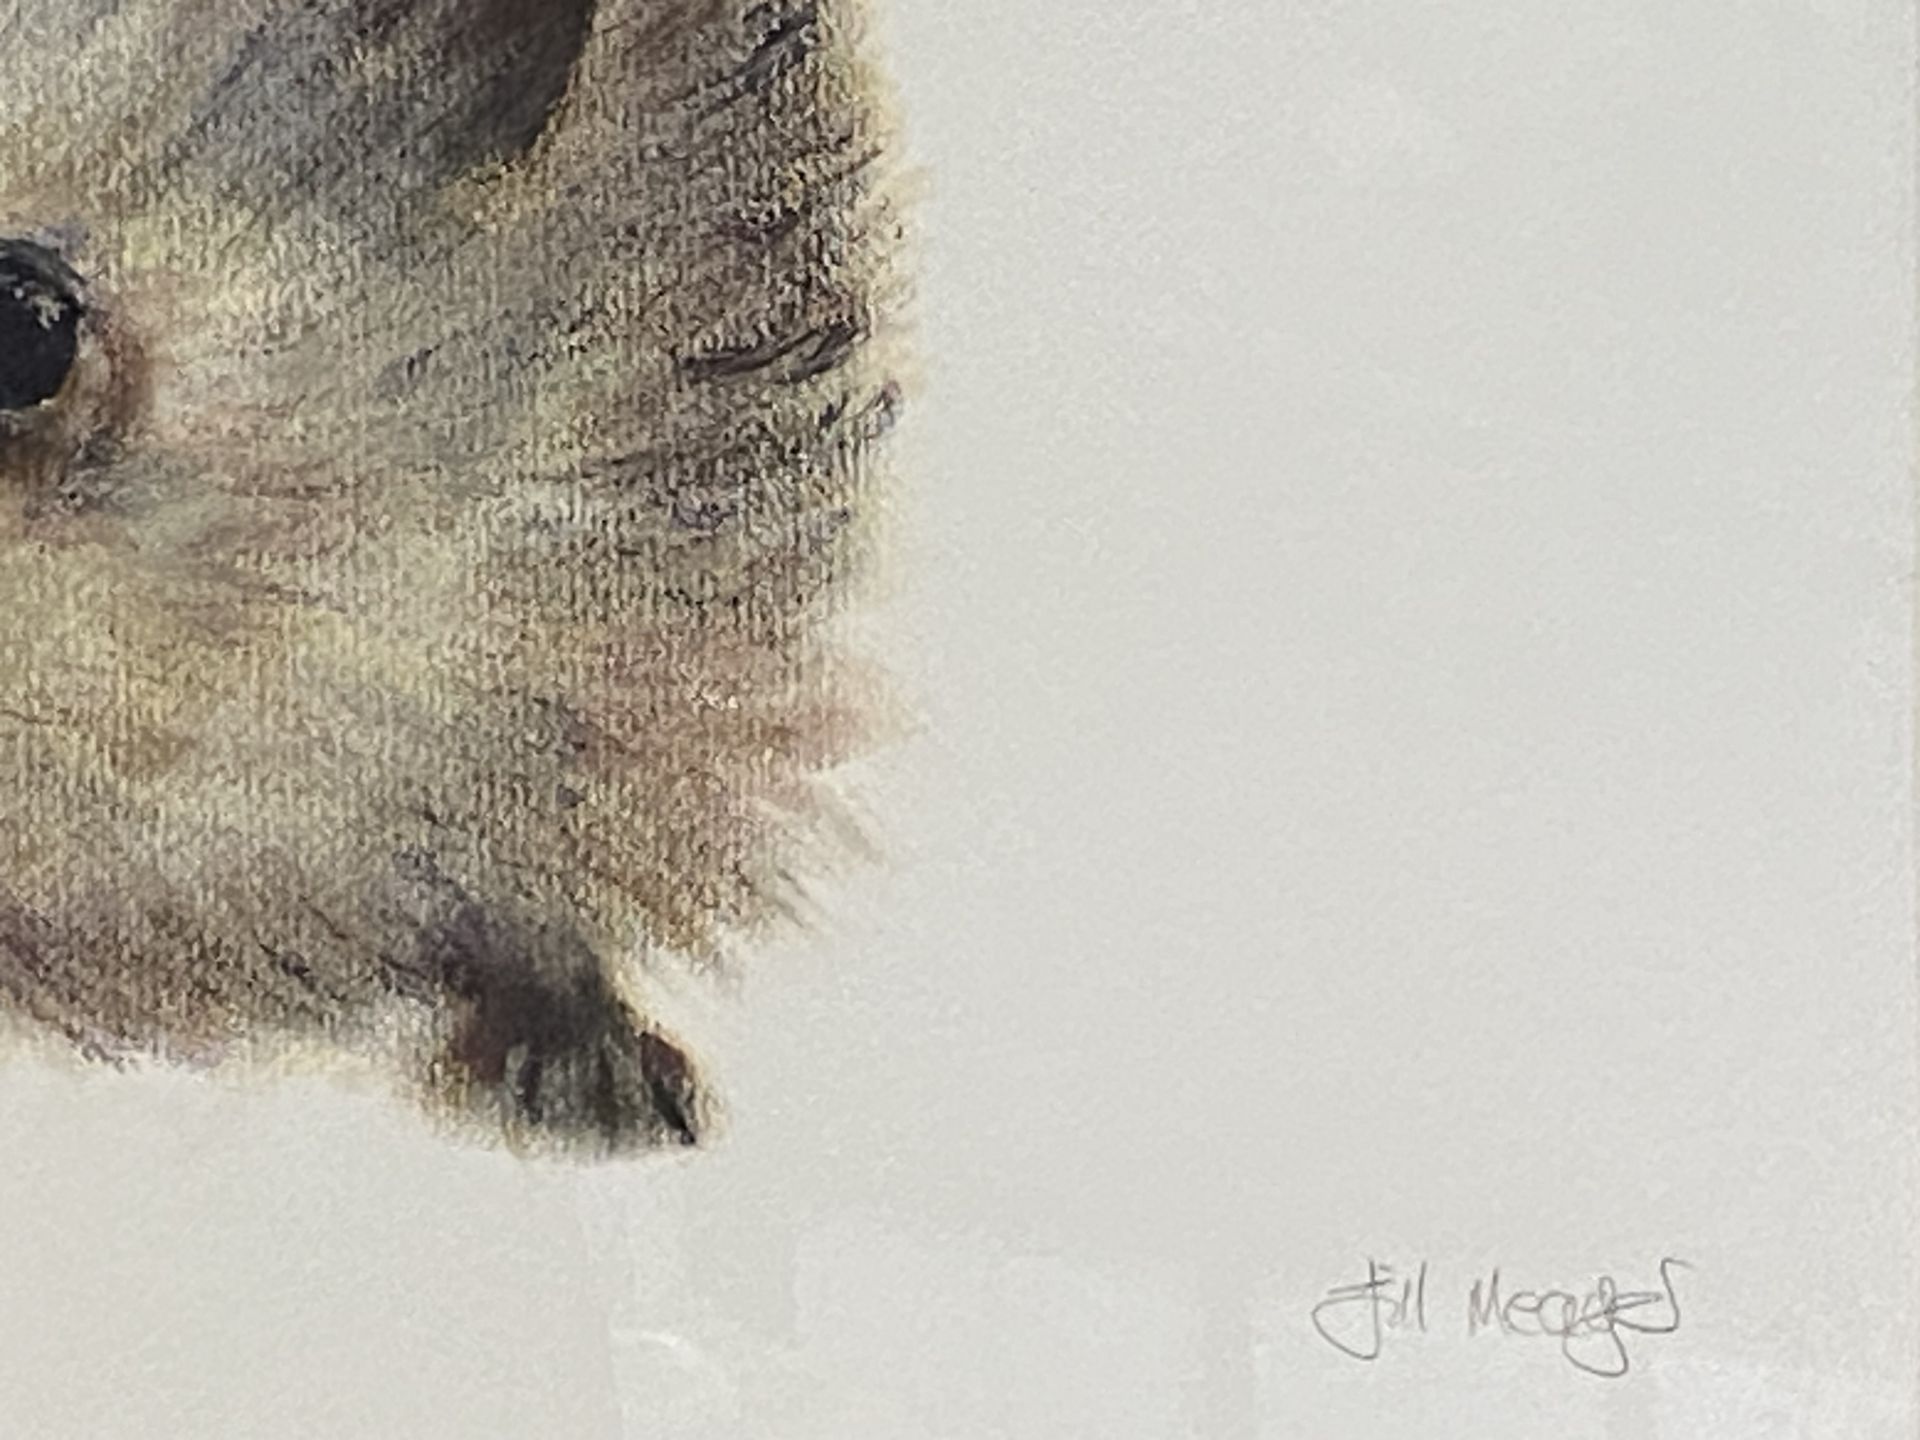 Framed and glazed pastel drawing of a hedgehog, signed Gill Meager - Image 4 of 4